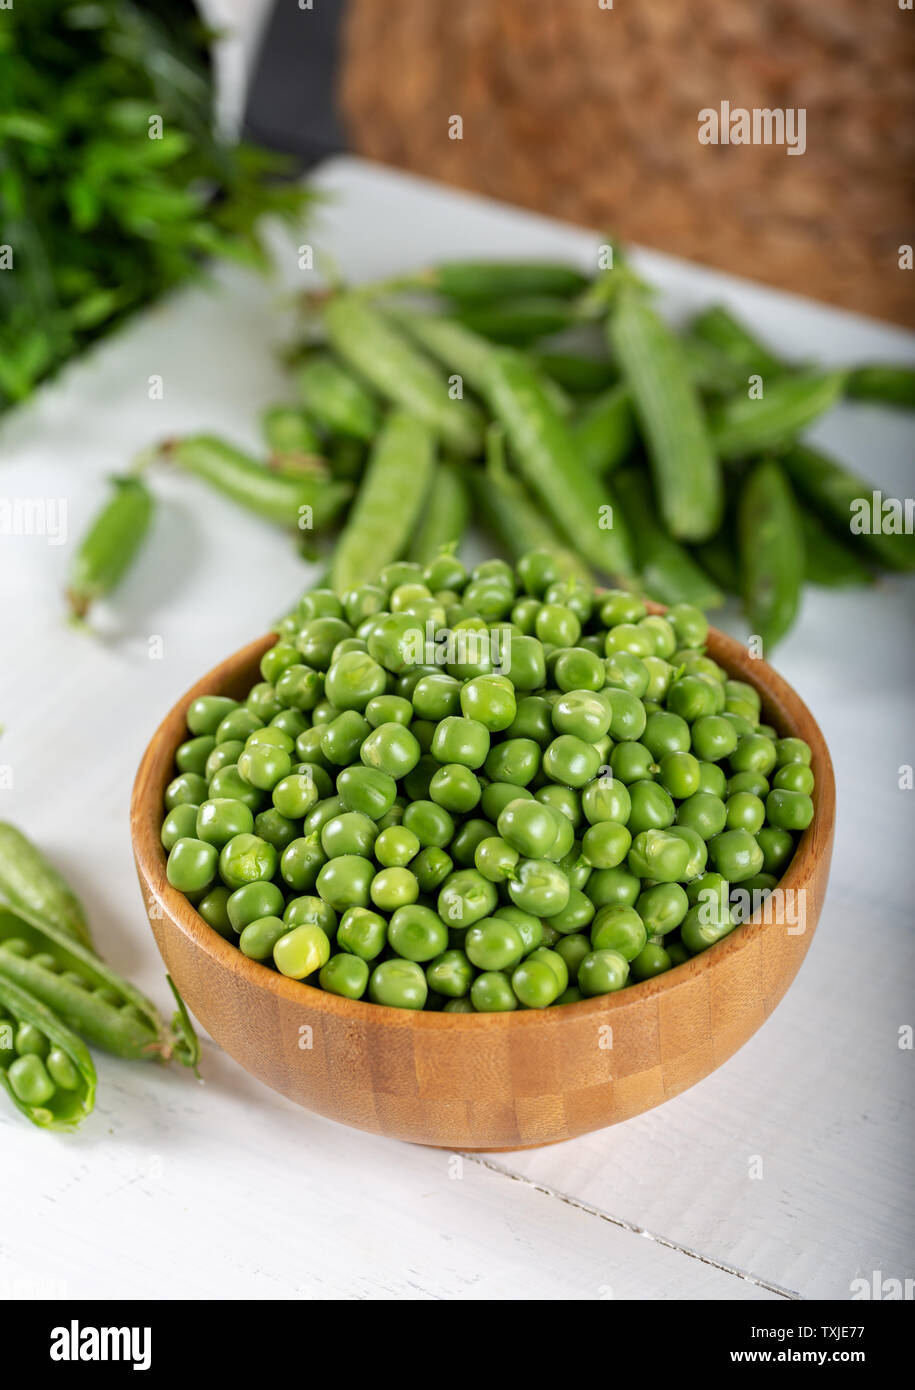 Fresh green peas in wooden bowl on white background. Stock Photo